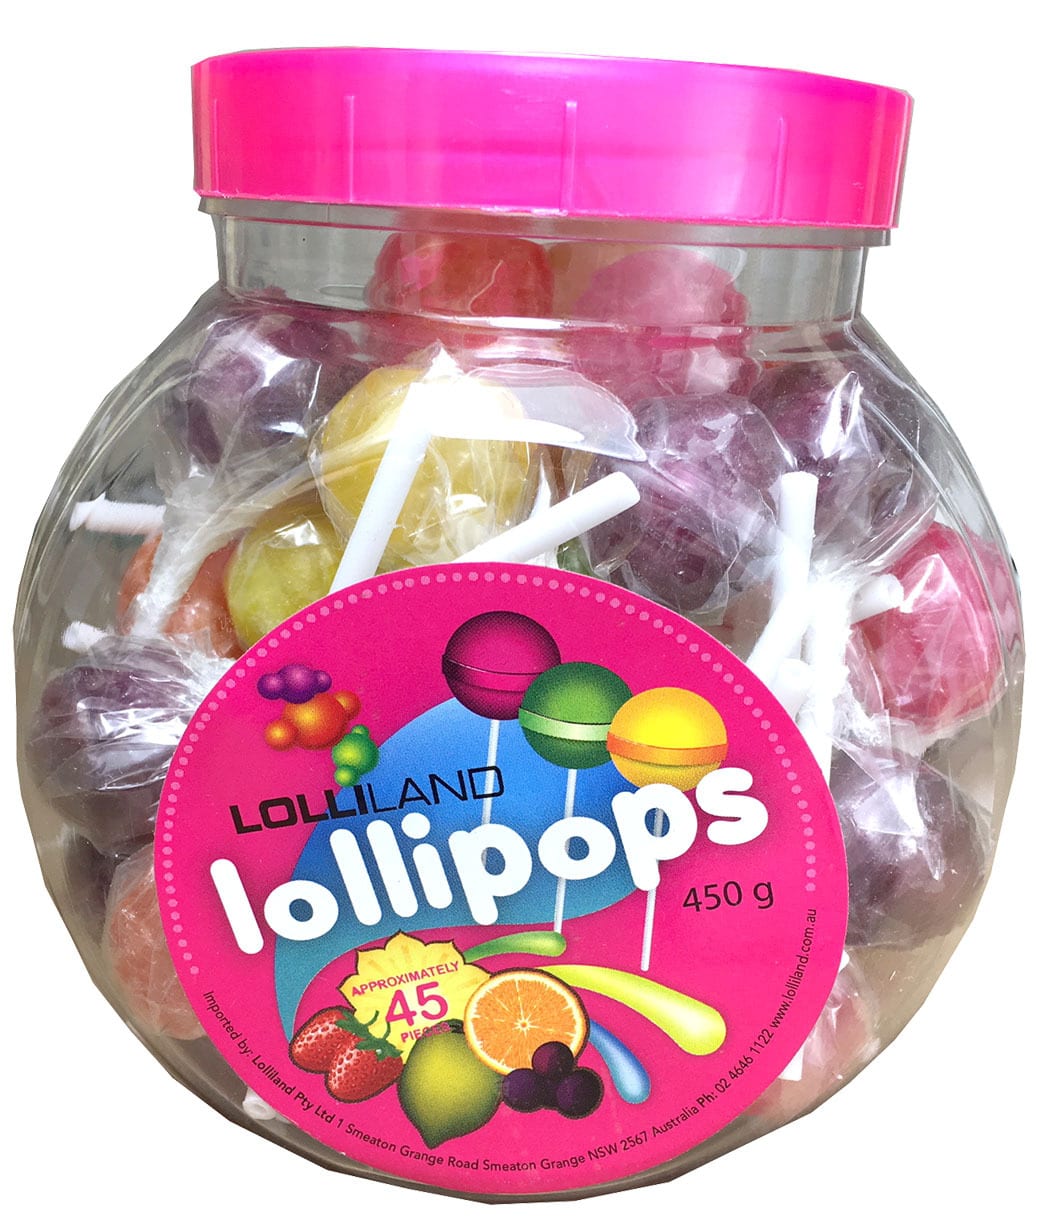 Lollipops Mixed Jar 45 Individually wrapped 450g